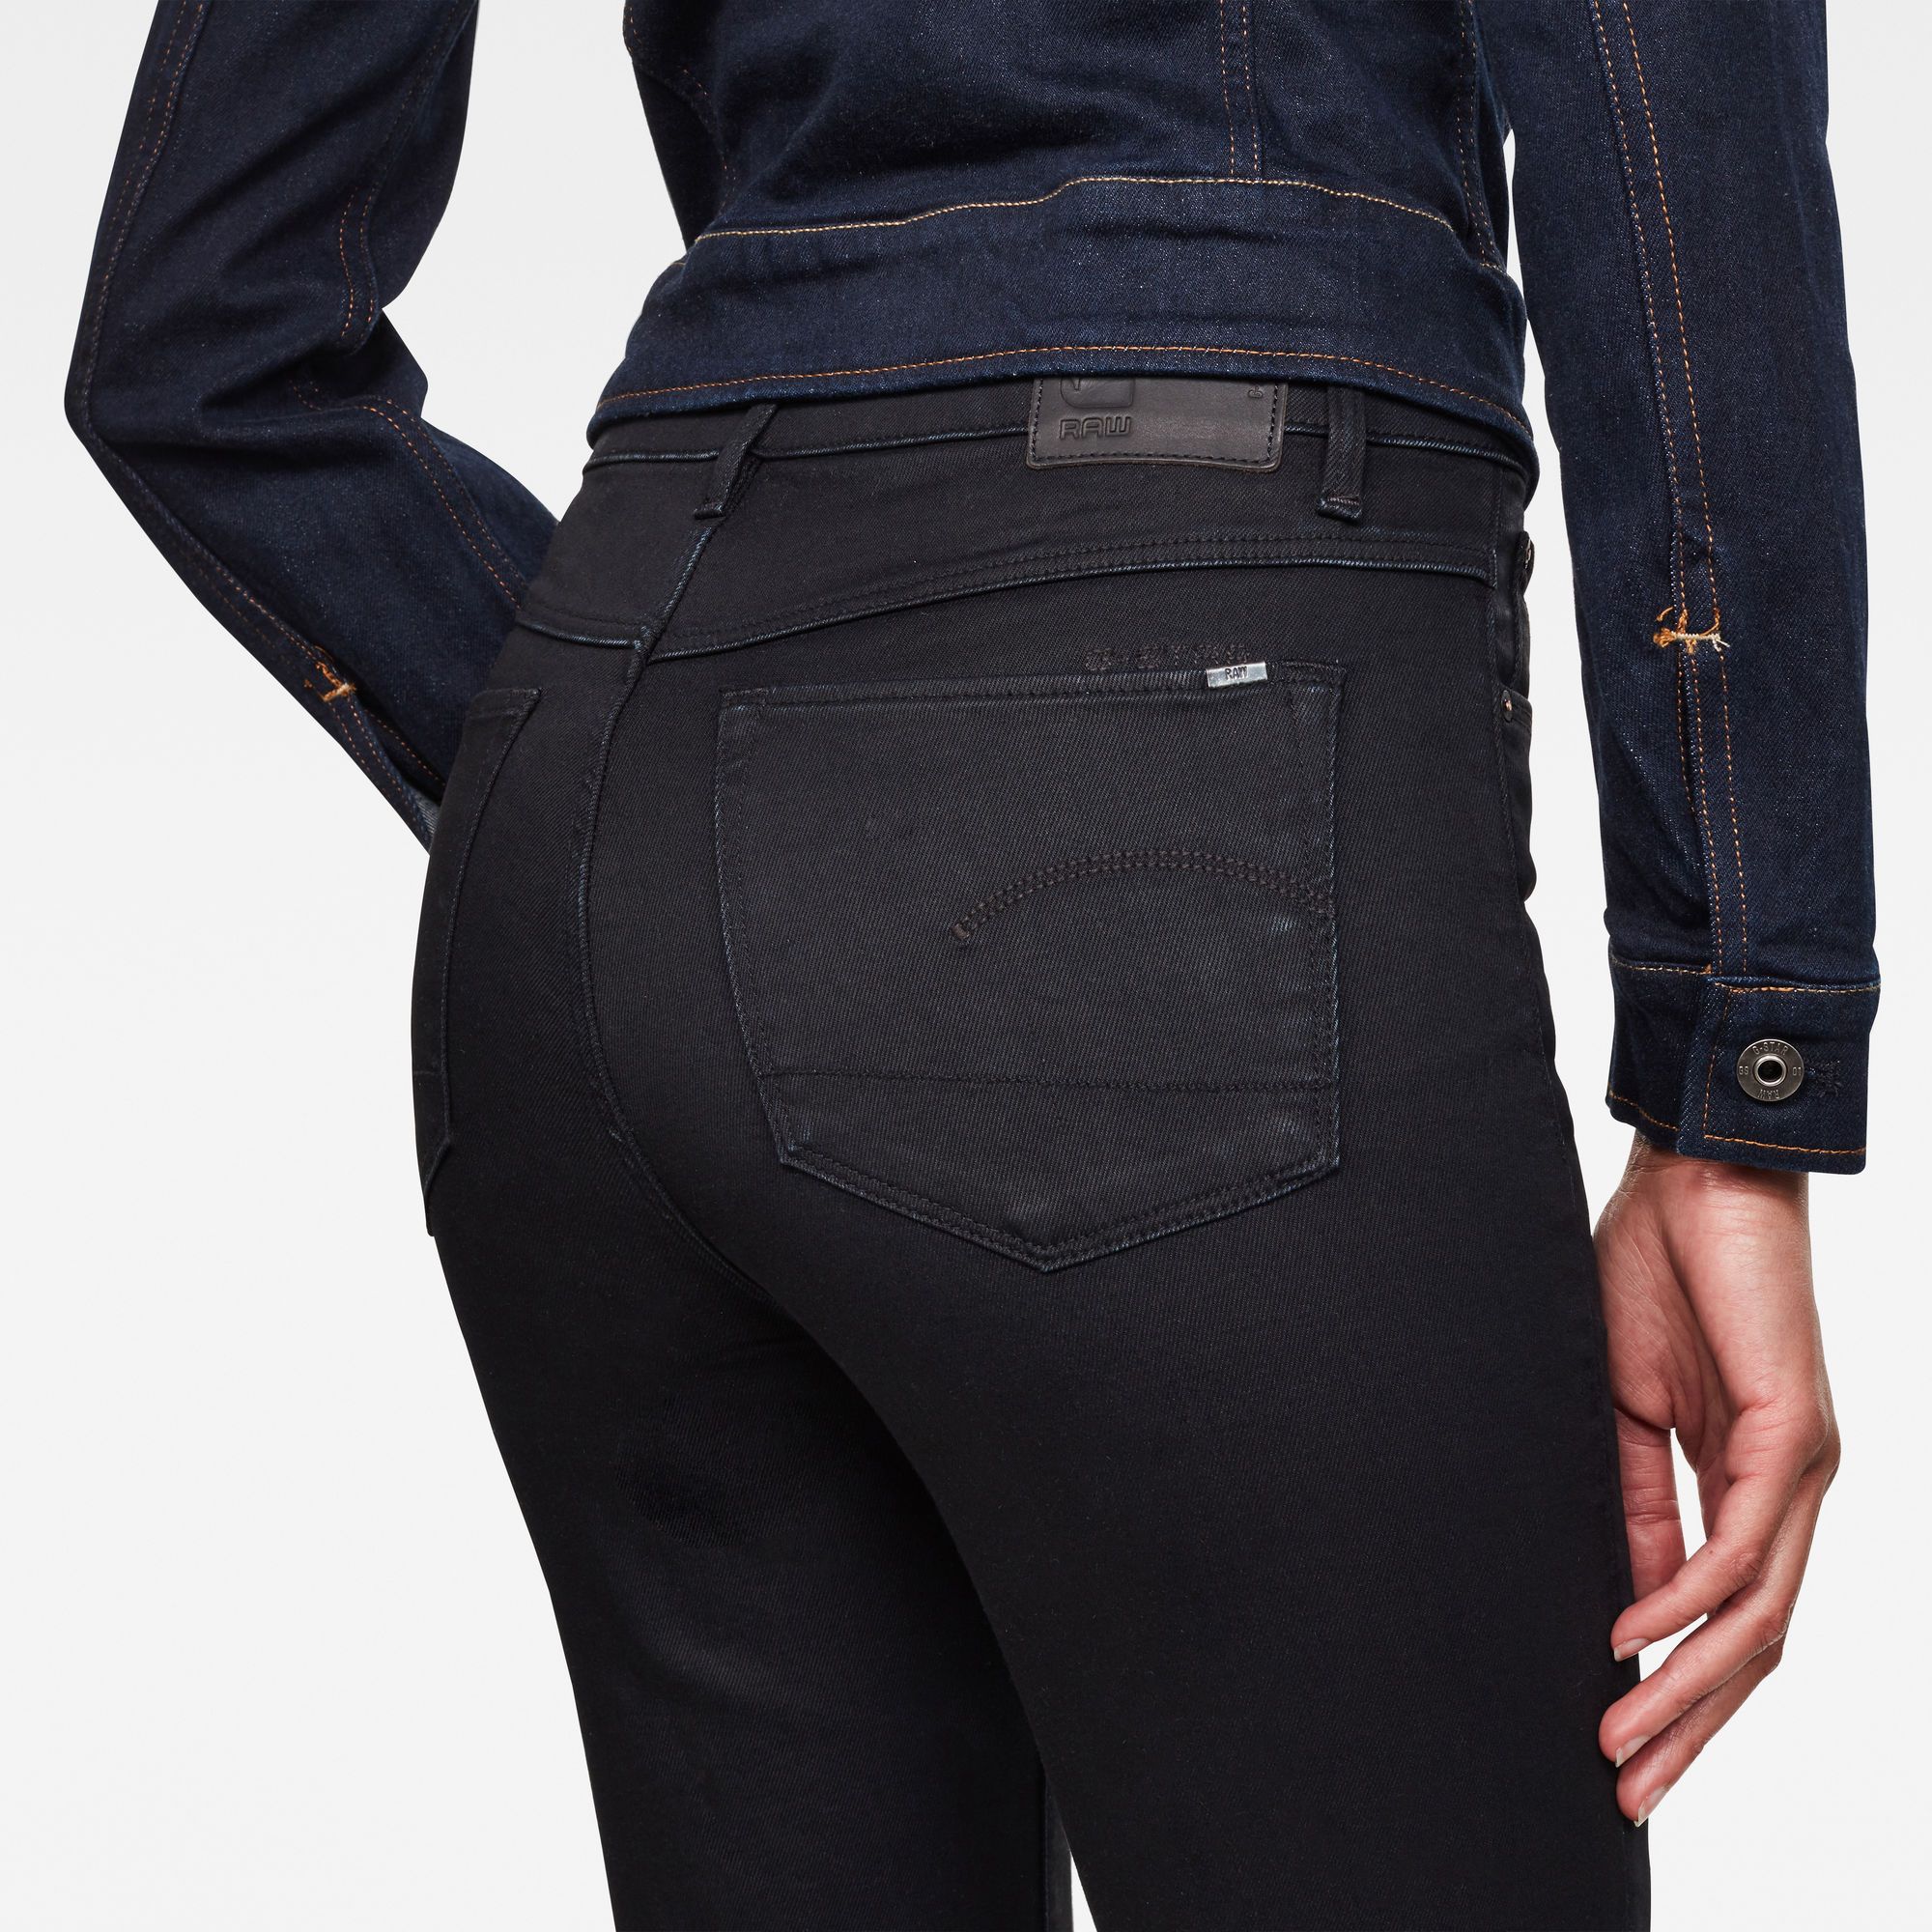 Fitted waistband. High waist. Tight through the thigh, flared leg towards hem. Brand graphic set just above the back pocket. Zip fly. Zip & button closure. High waist. This superstretch denim is created out of a technical and sustainable multi-fiber blend. Designed with high stretch and recovery and a soft handfeel. 9.75 oz stretch denim, 3x1 Right hand twill construction. 35% Cotton, 35% Tencel™ Lyocell, 28% Polyester (Recycled), 2% Elastane (Lycra®). Skinny Flare